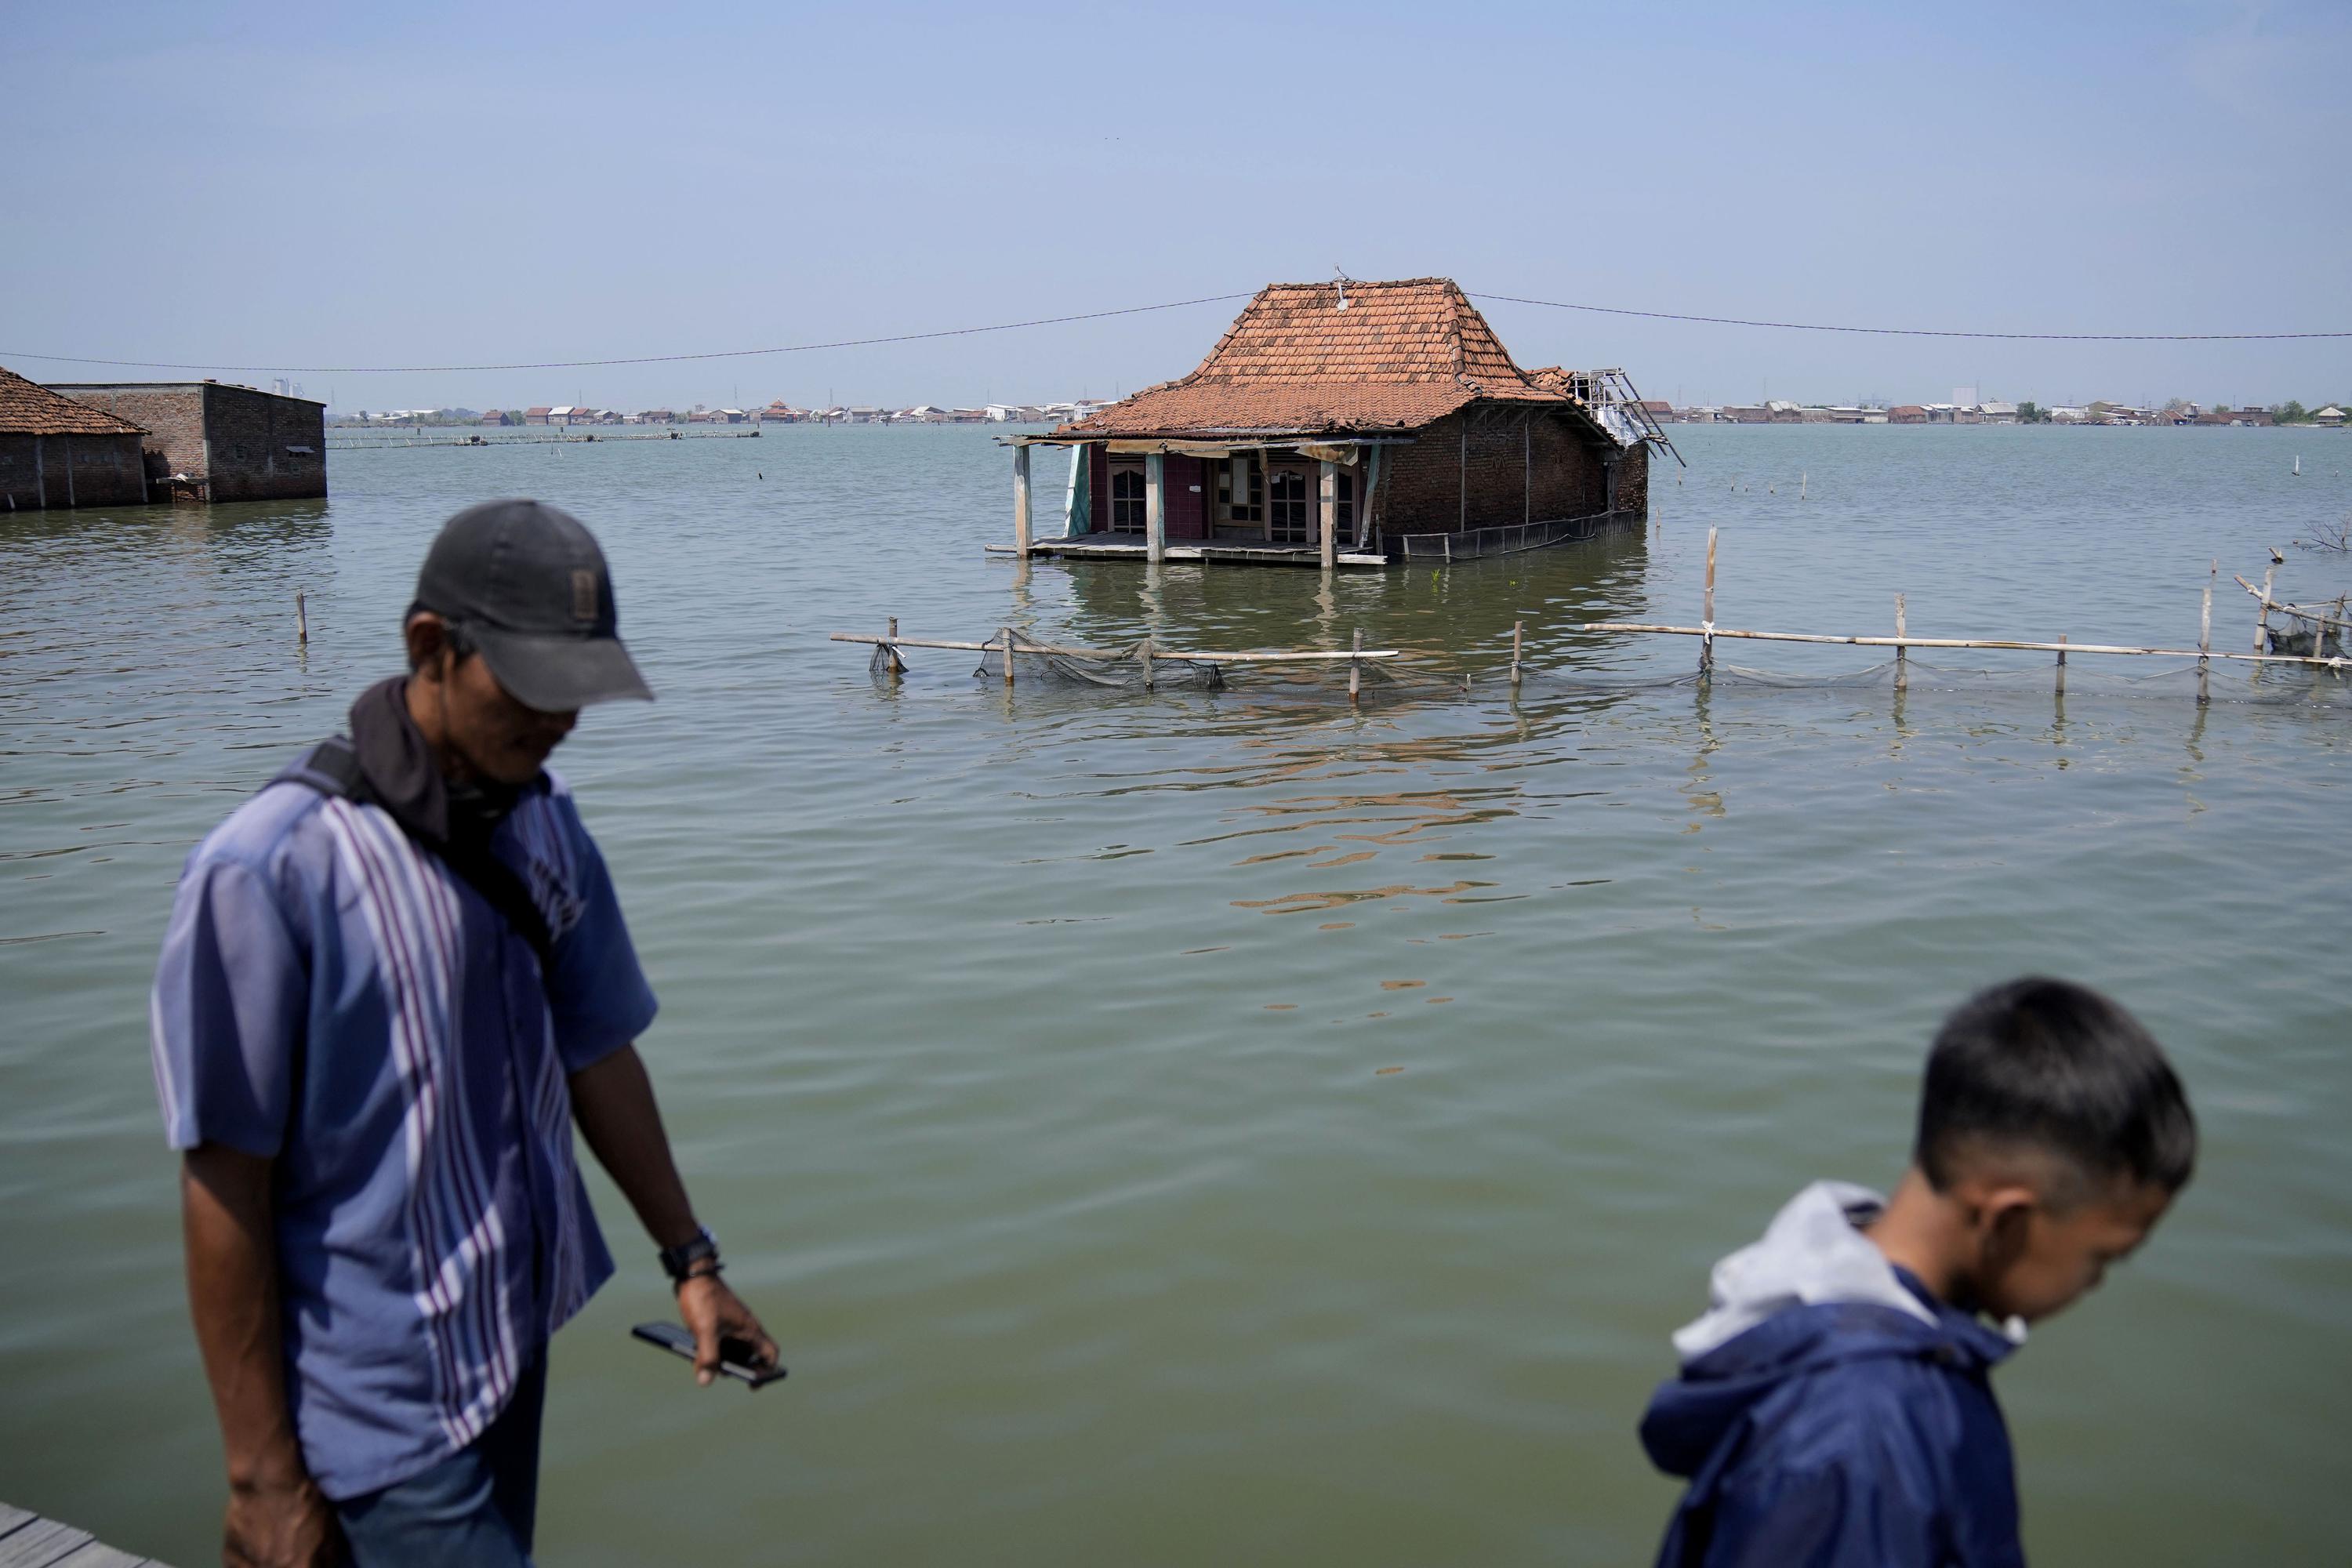 Climate Migration: Floods displace villagers in Indonesia - The Associated Press